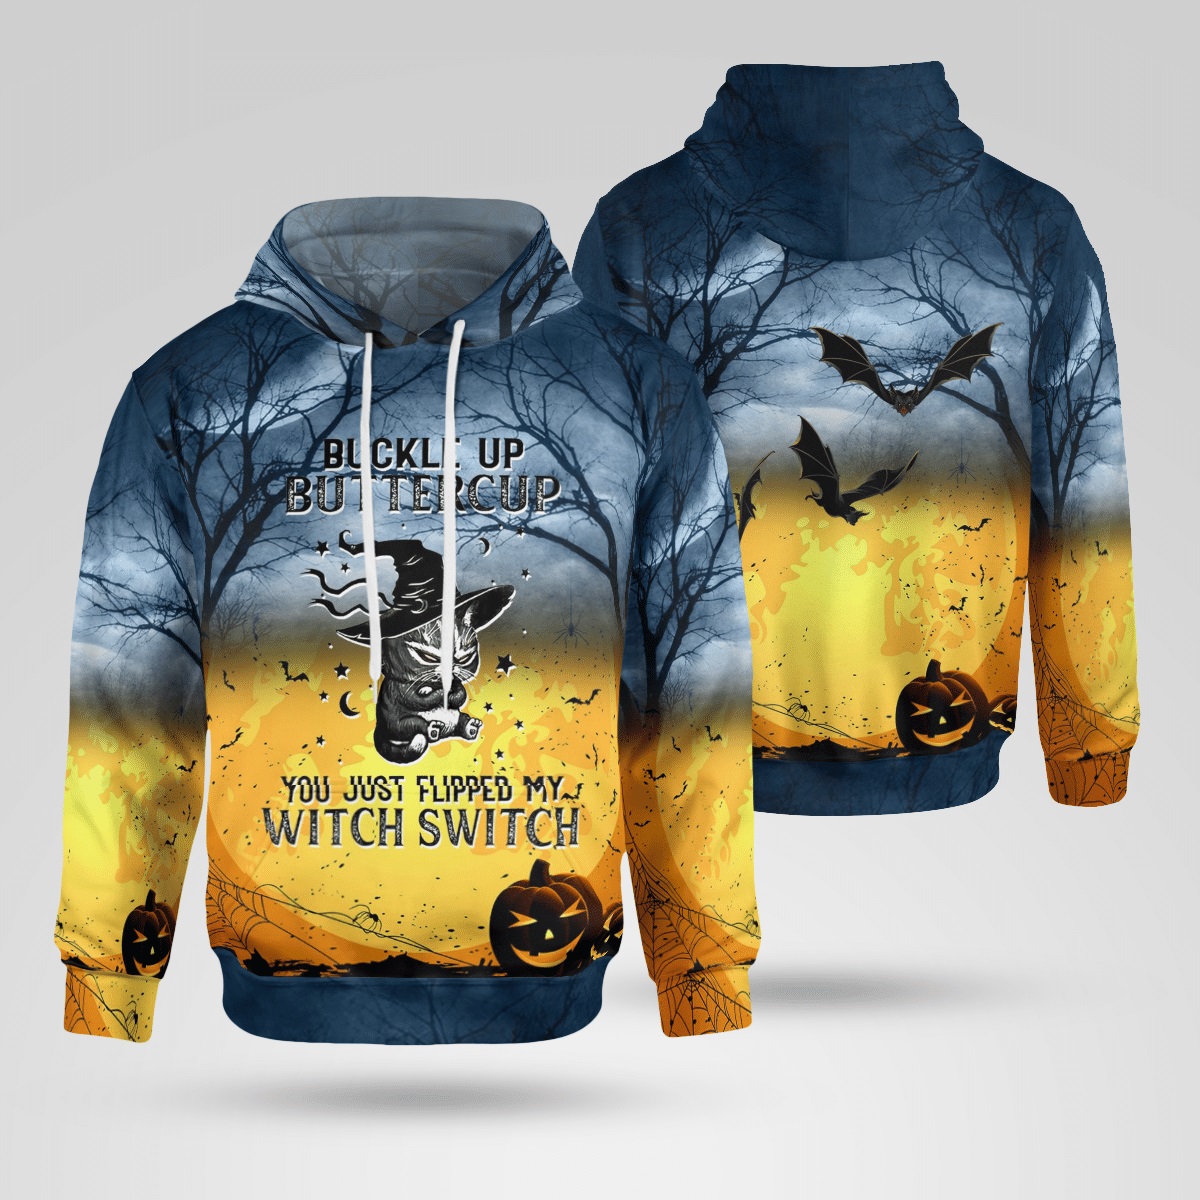 Cat Buckle up buttercup you just flipped my witch switch 3d hoodie and t-shirt